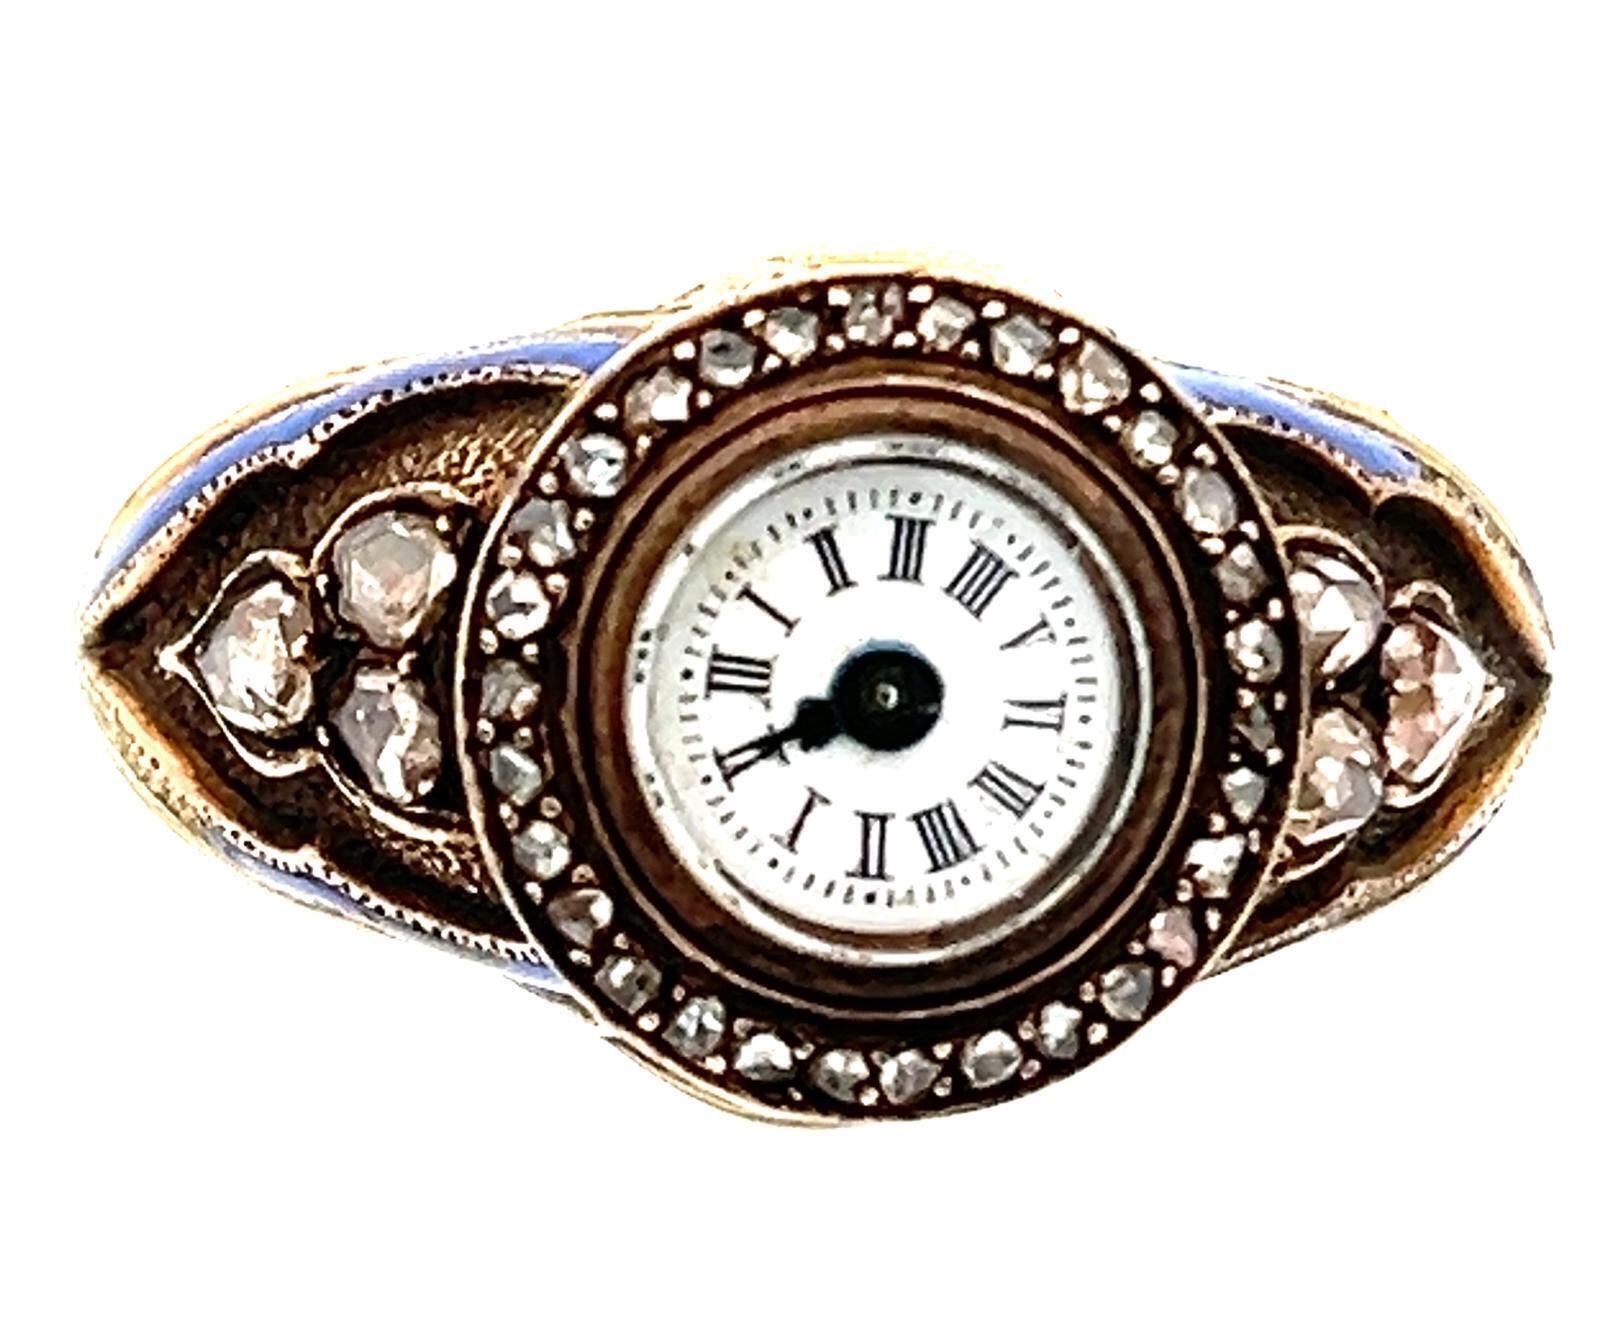 FRENCH RING WATCH IN 18K GOLD WITH ROSE CUT DIAMONDS AND ENAMEL, CIRCA 19TH CENTURY